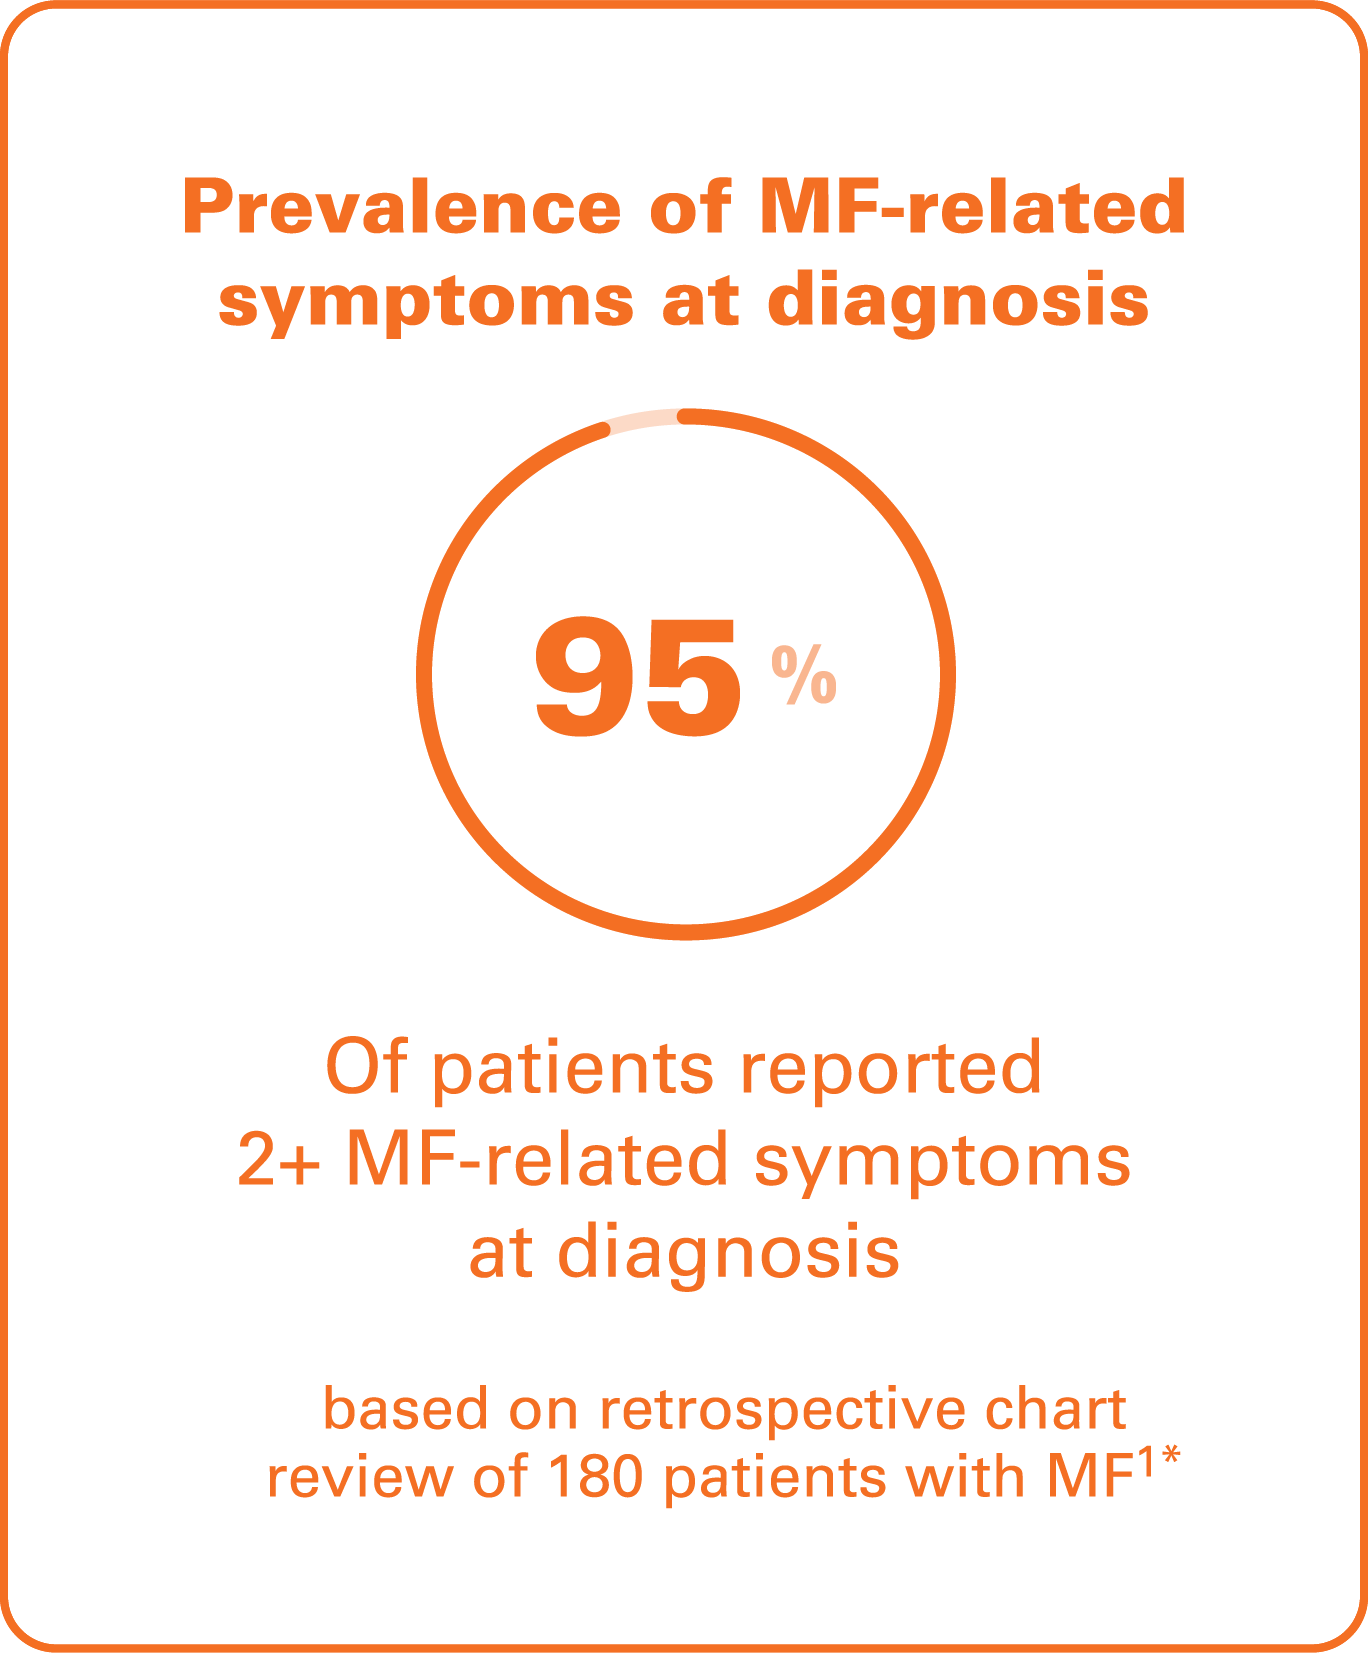 Image says Prevalence of MF-related symptoms at diagnosis